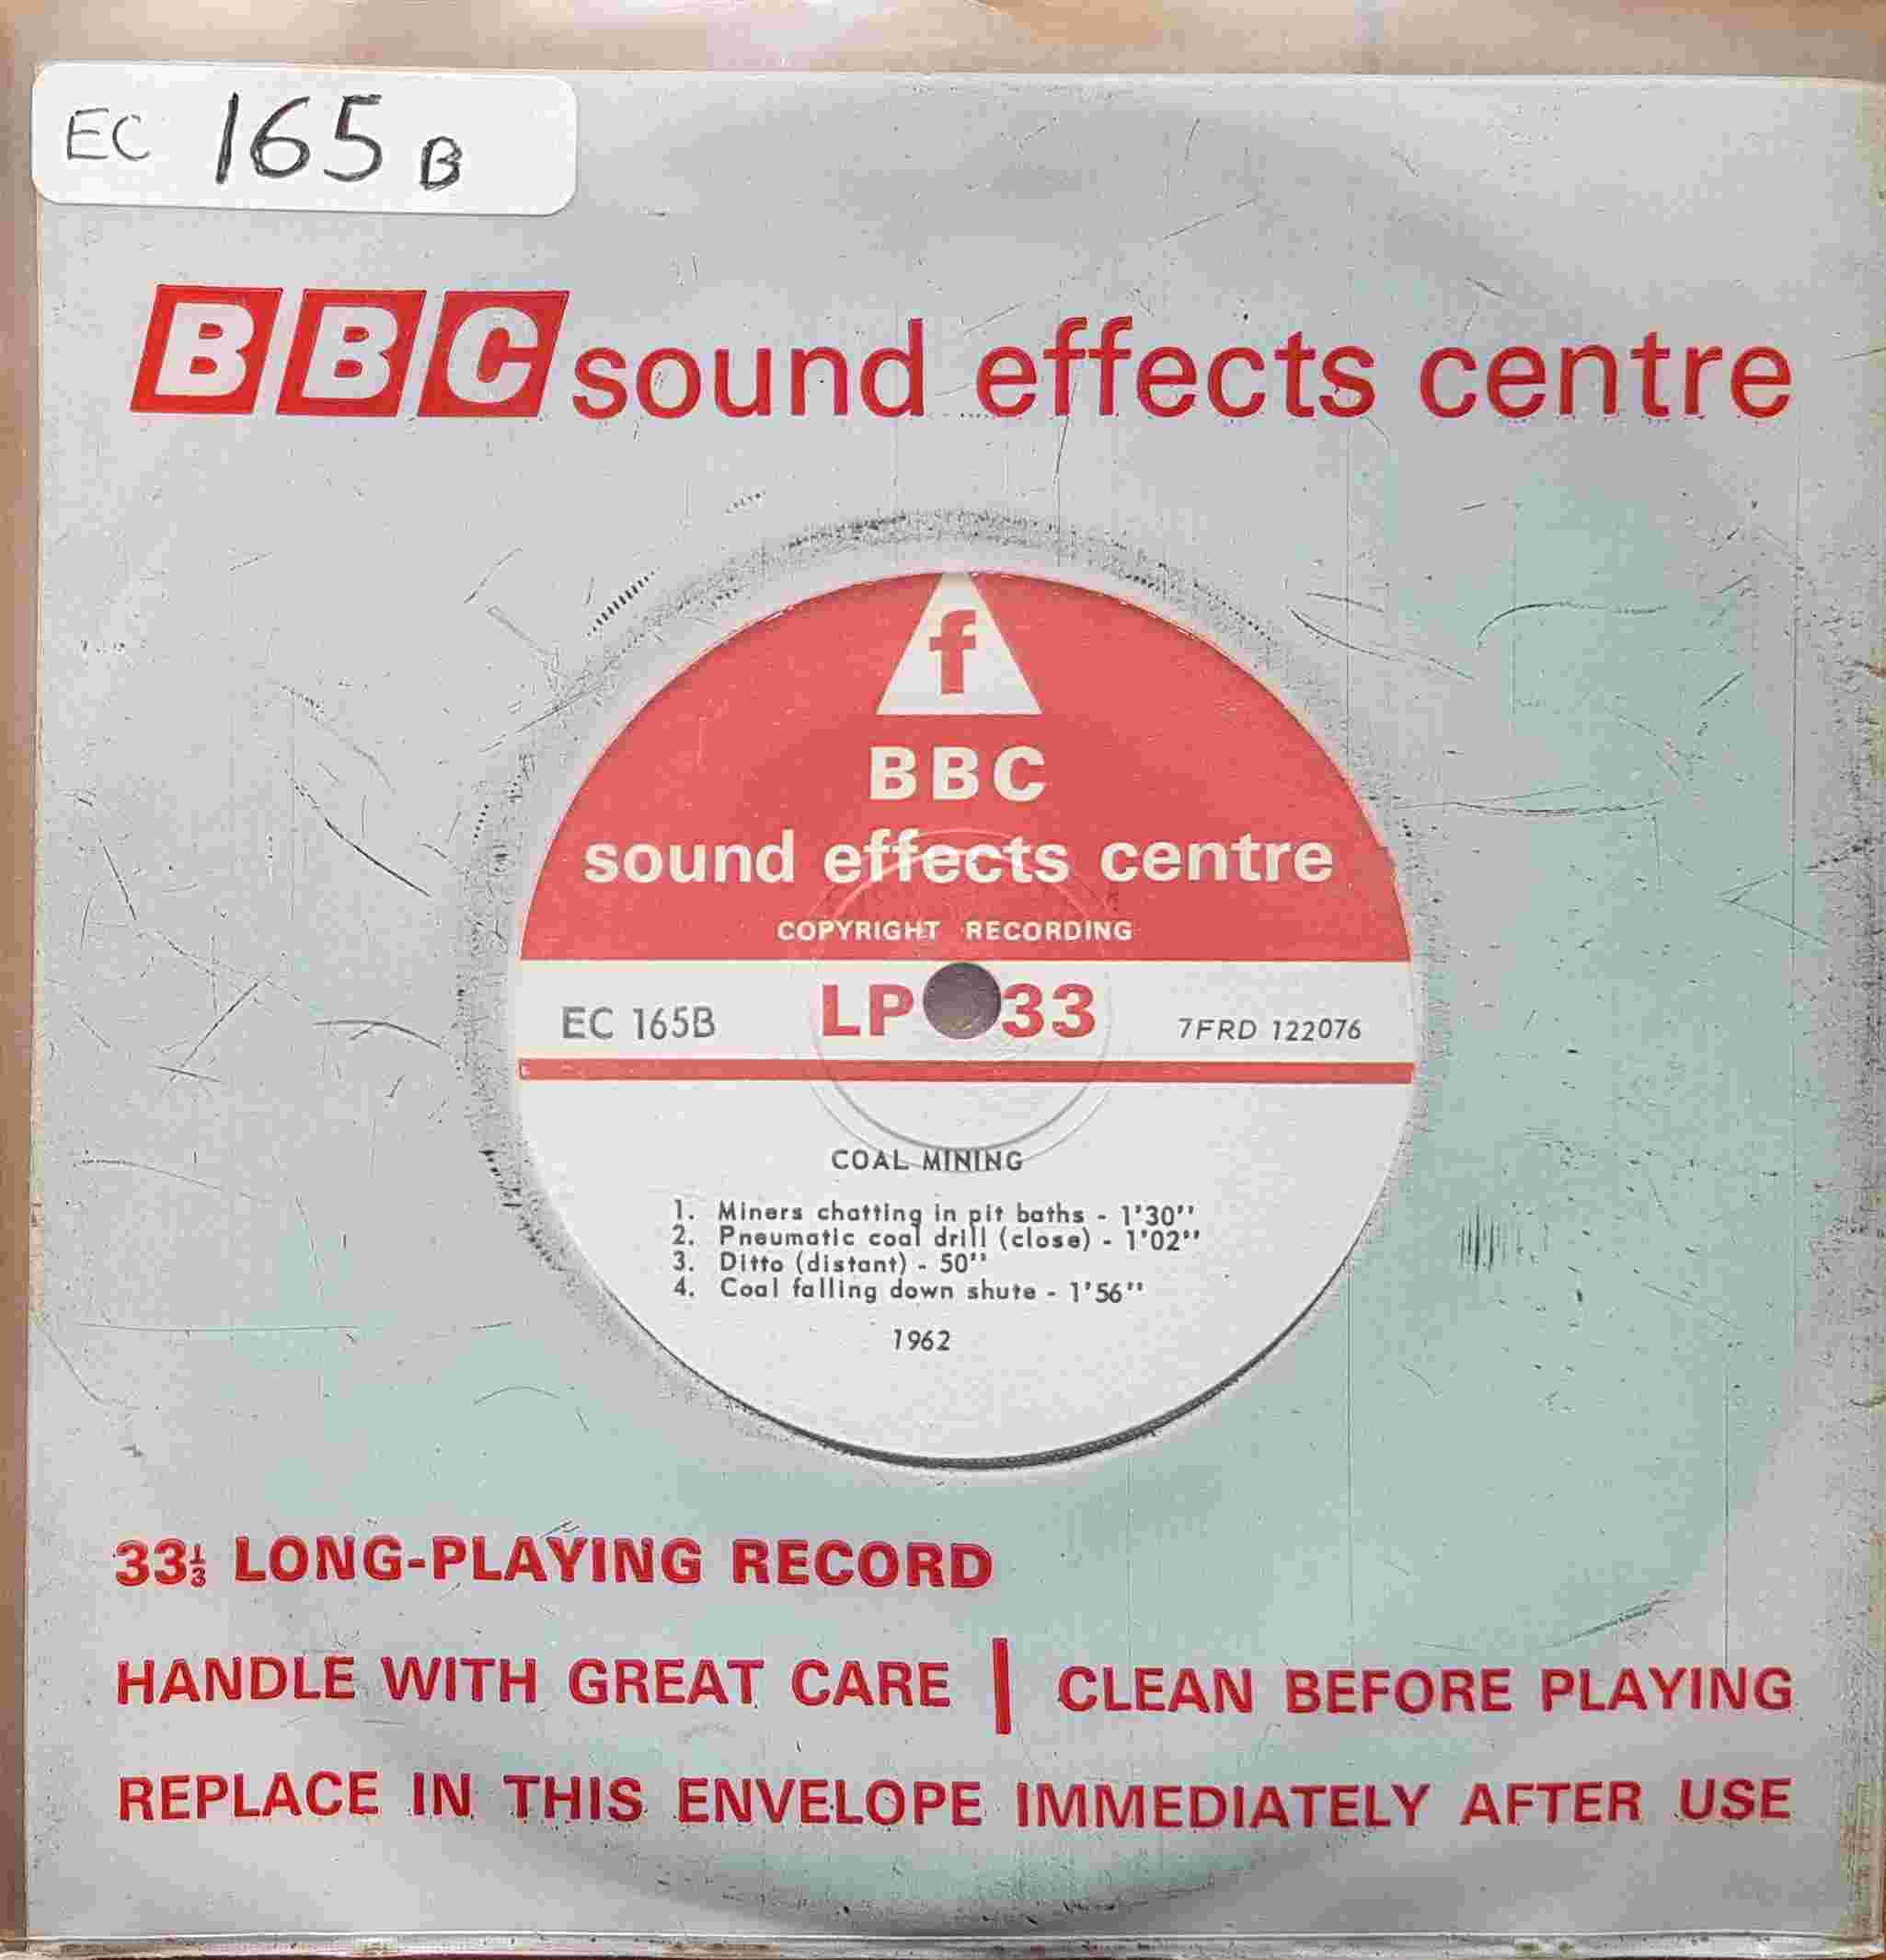 Picture of EC 165B Coal mining by artist Not registered from the BBC singles - Records and Tapes library